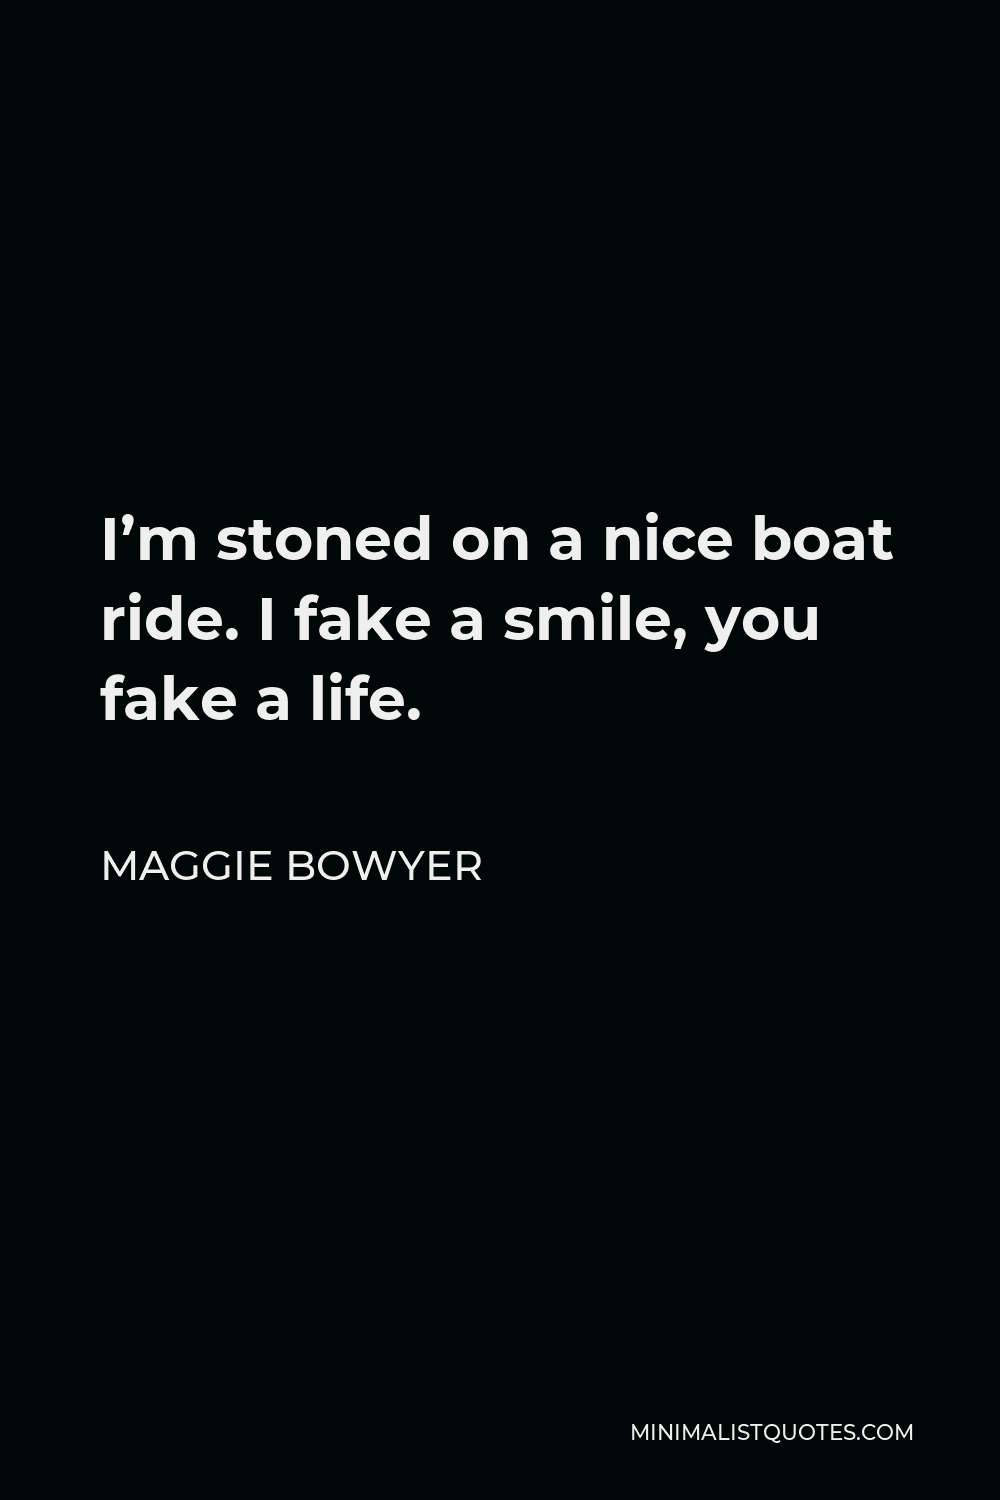 Maggie Bowyer Quote - I’m stoned on a nice boat ride. I fake a smile, you fake a life.